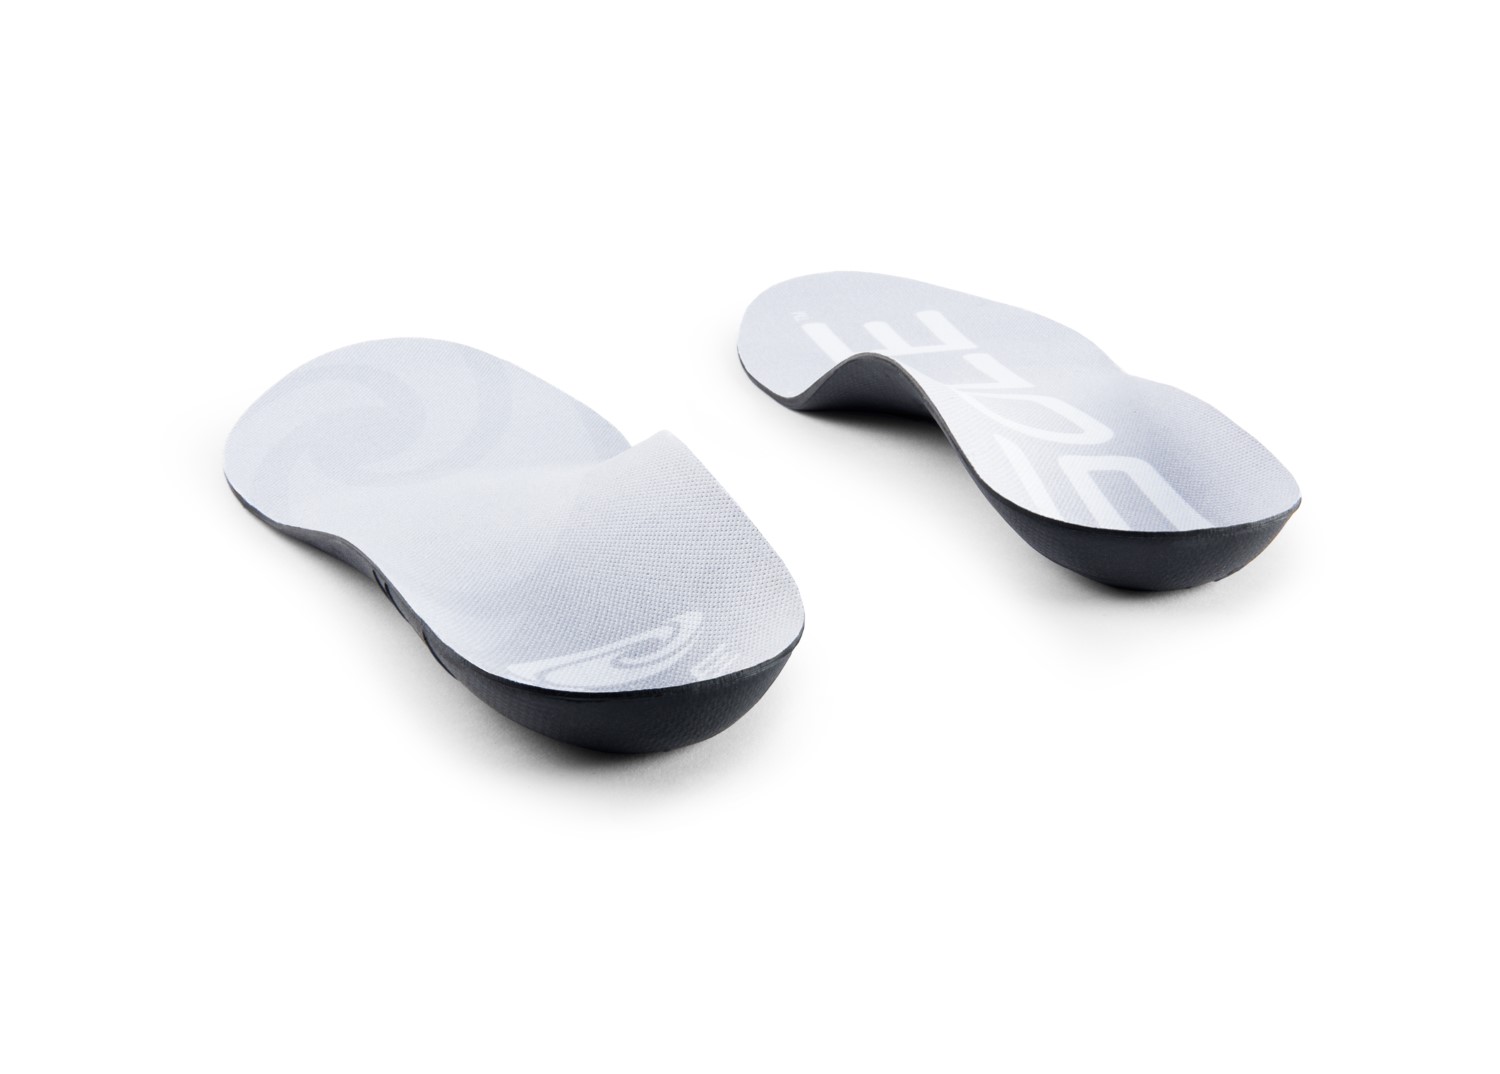 thin insoles for dress shoes